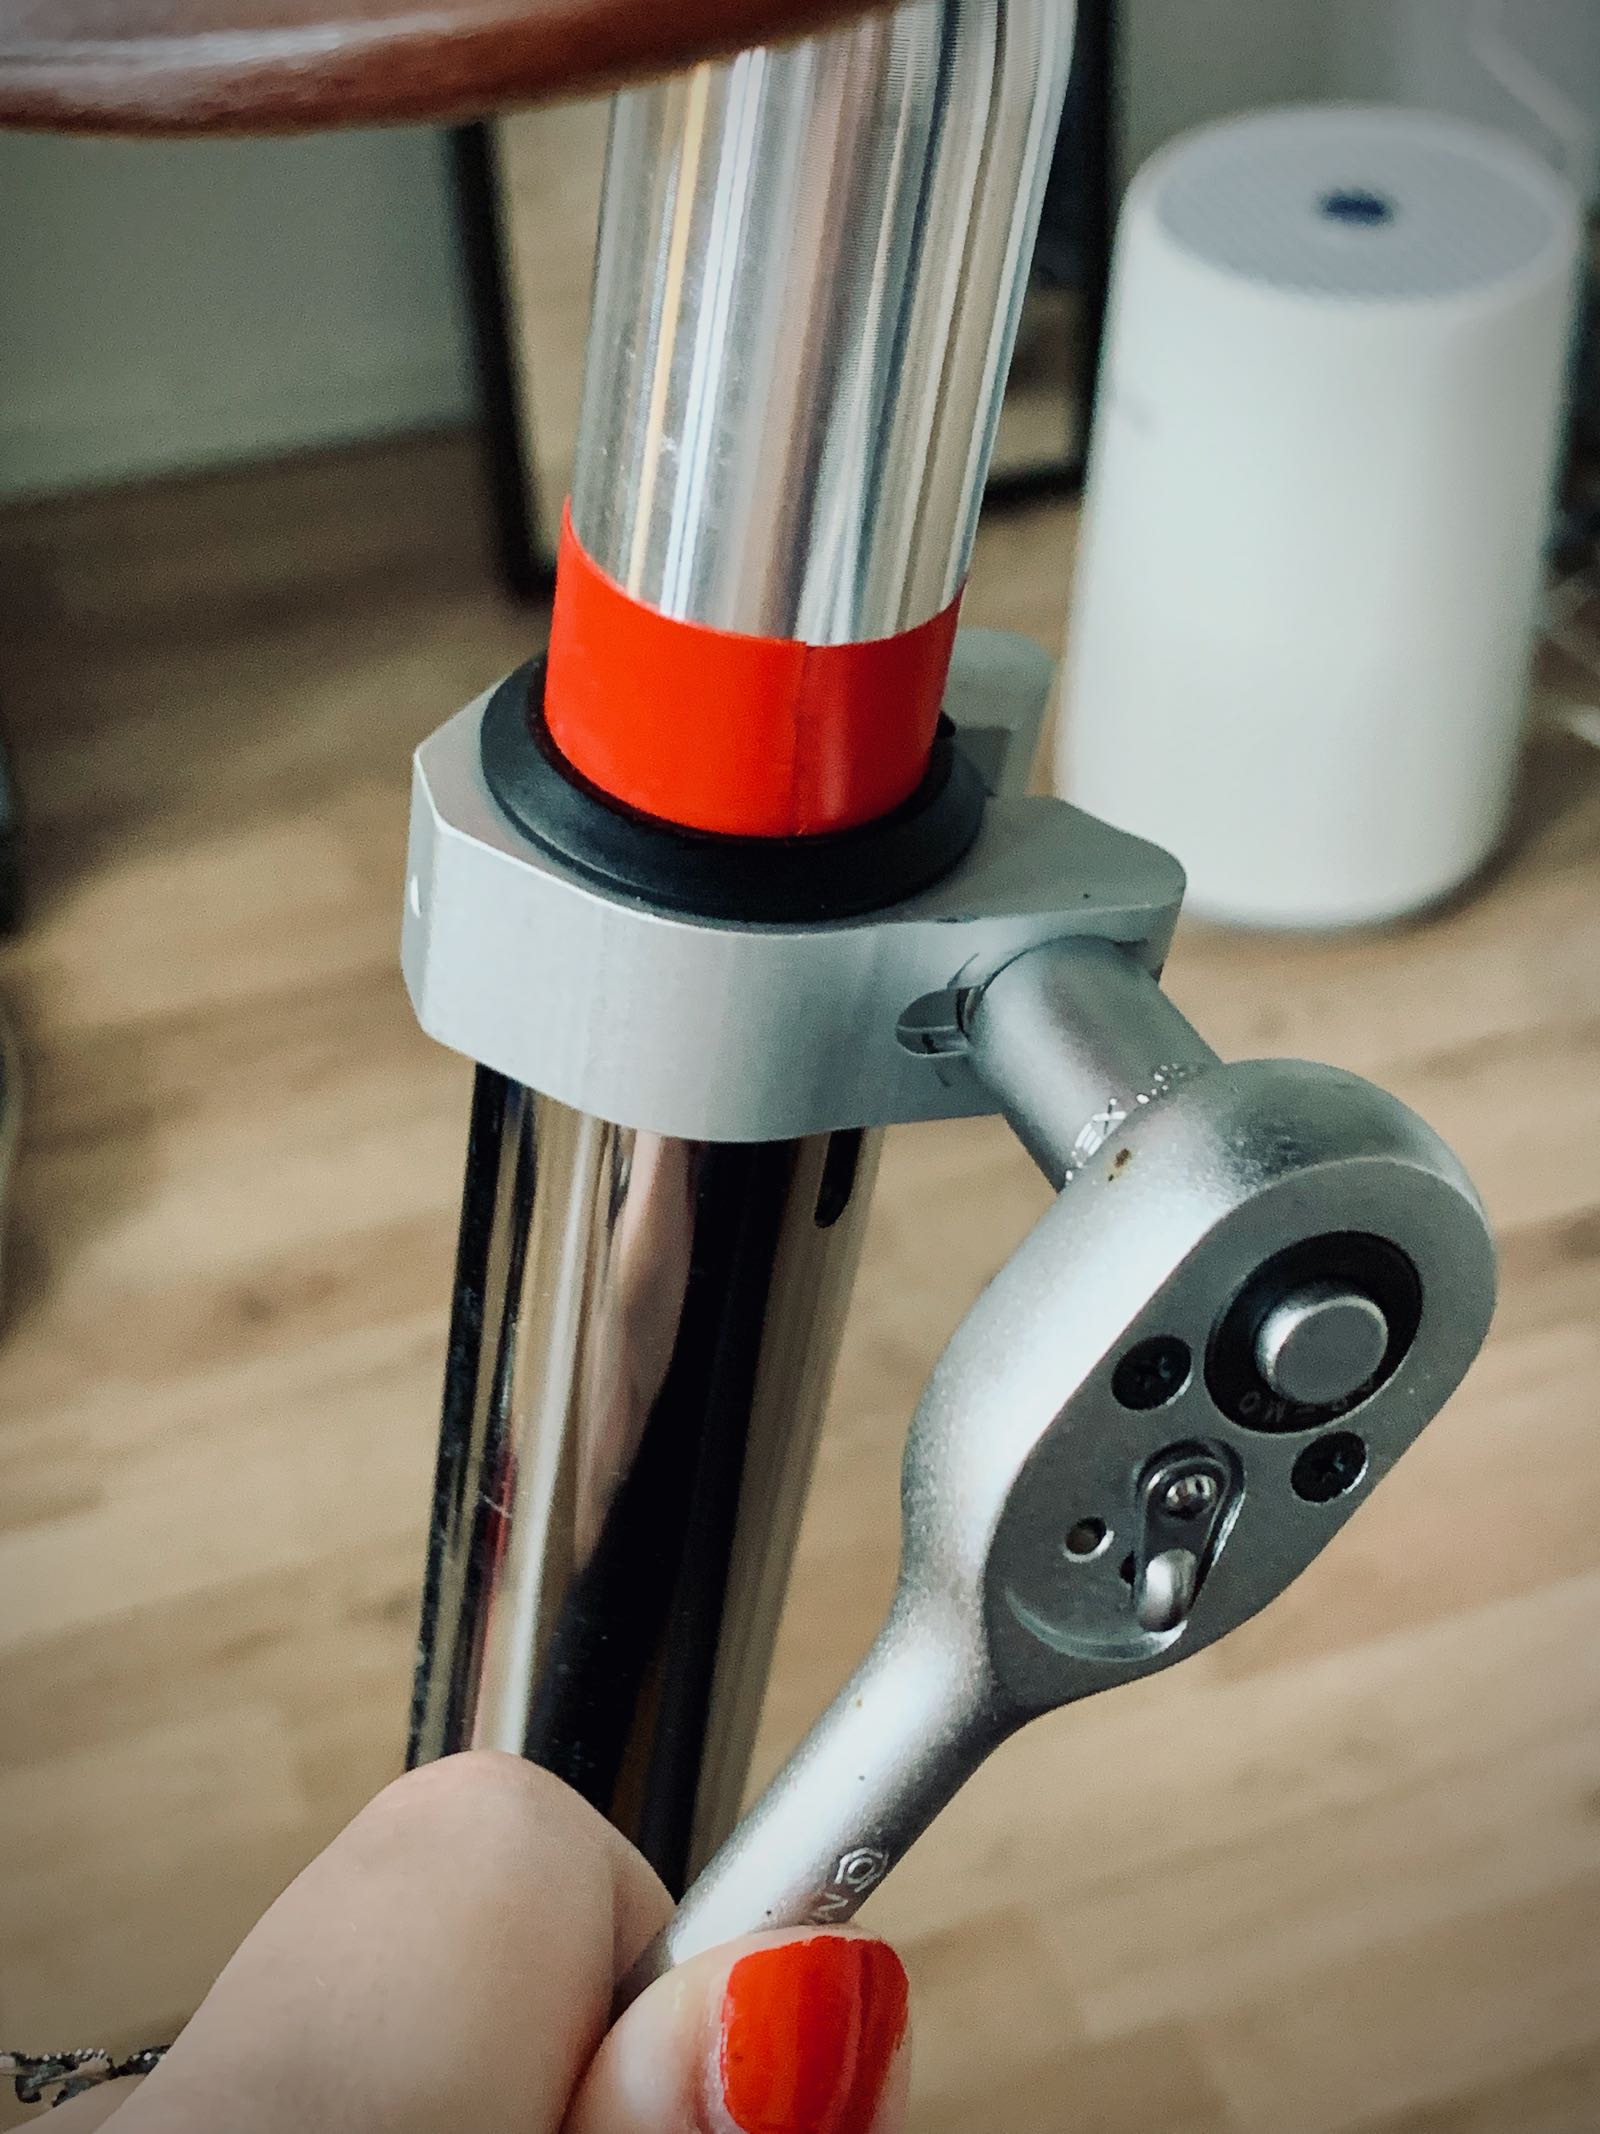 Tightnening the clamp with nut and bolt on the seatpost